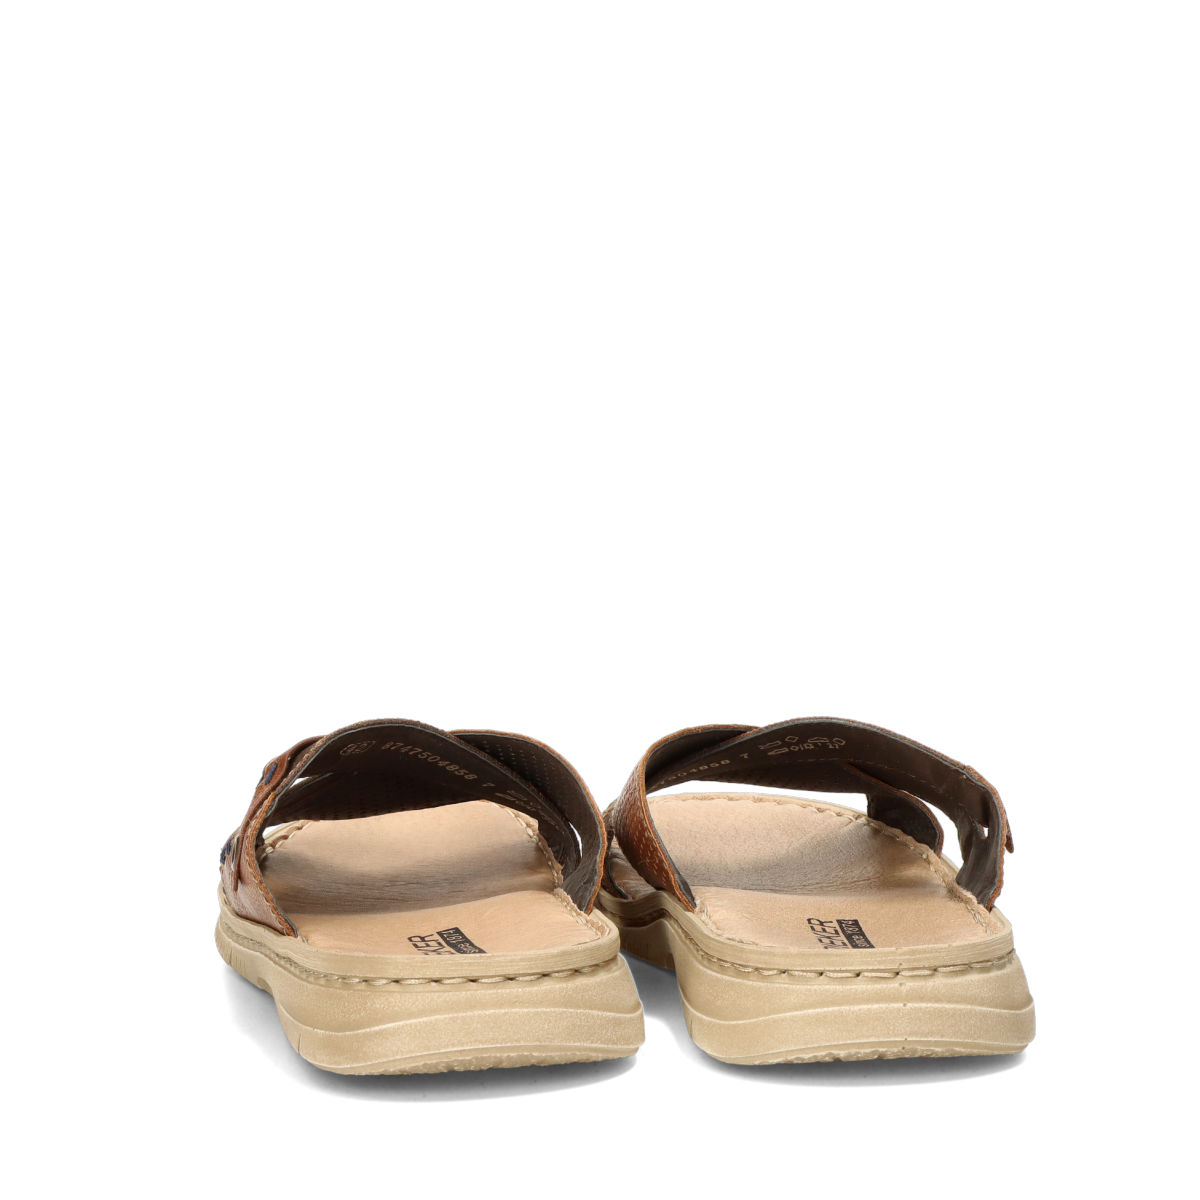 Rieker comfortable slippers - | Robel.shoes